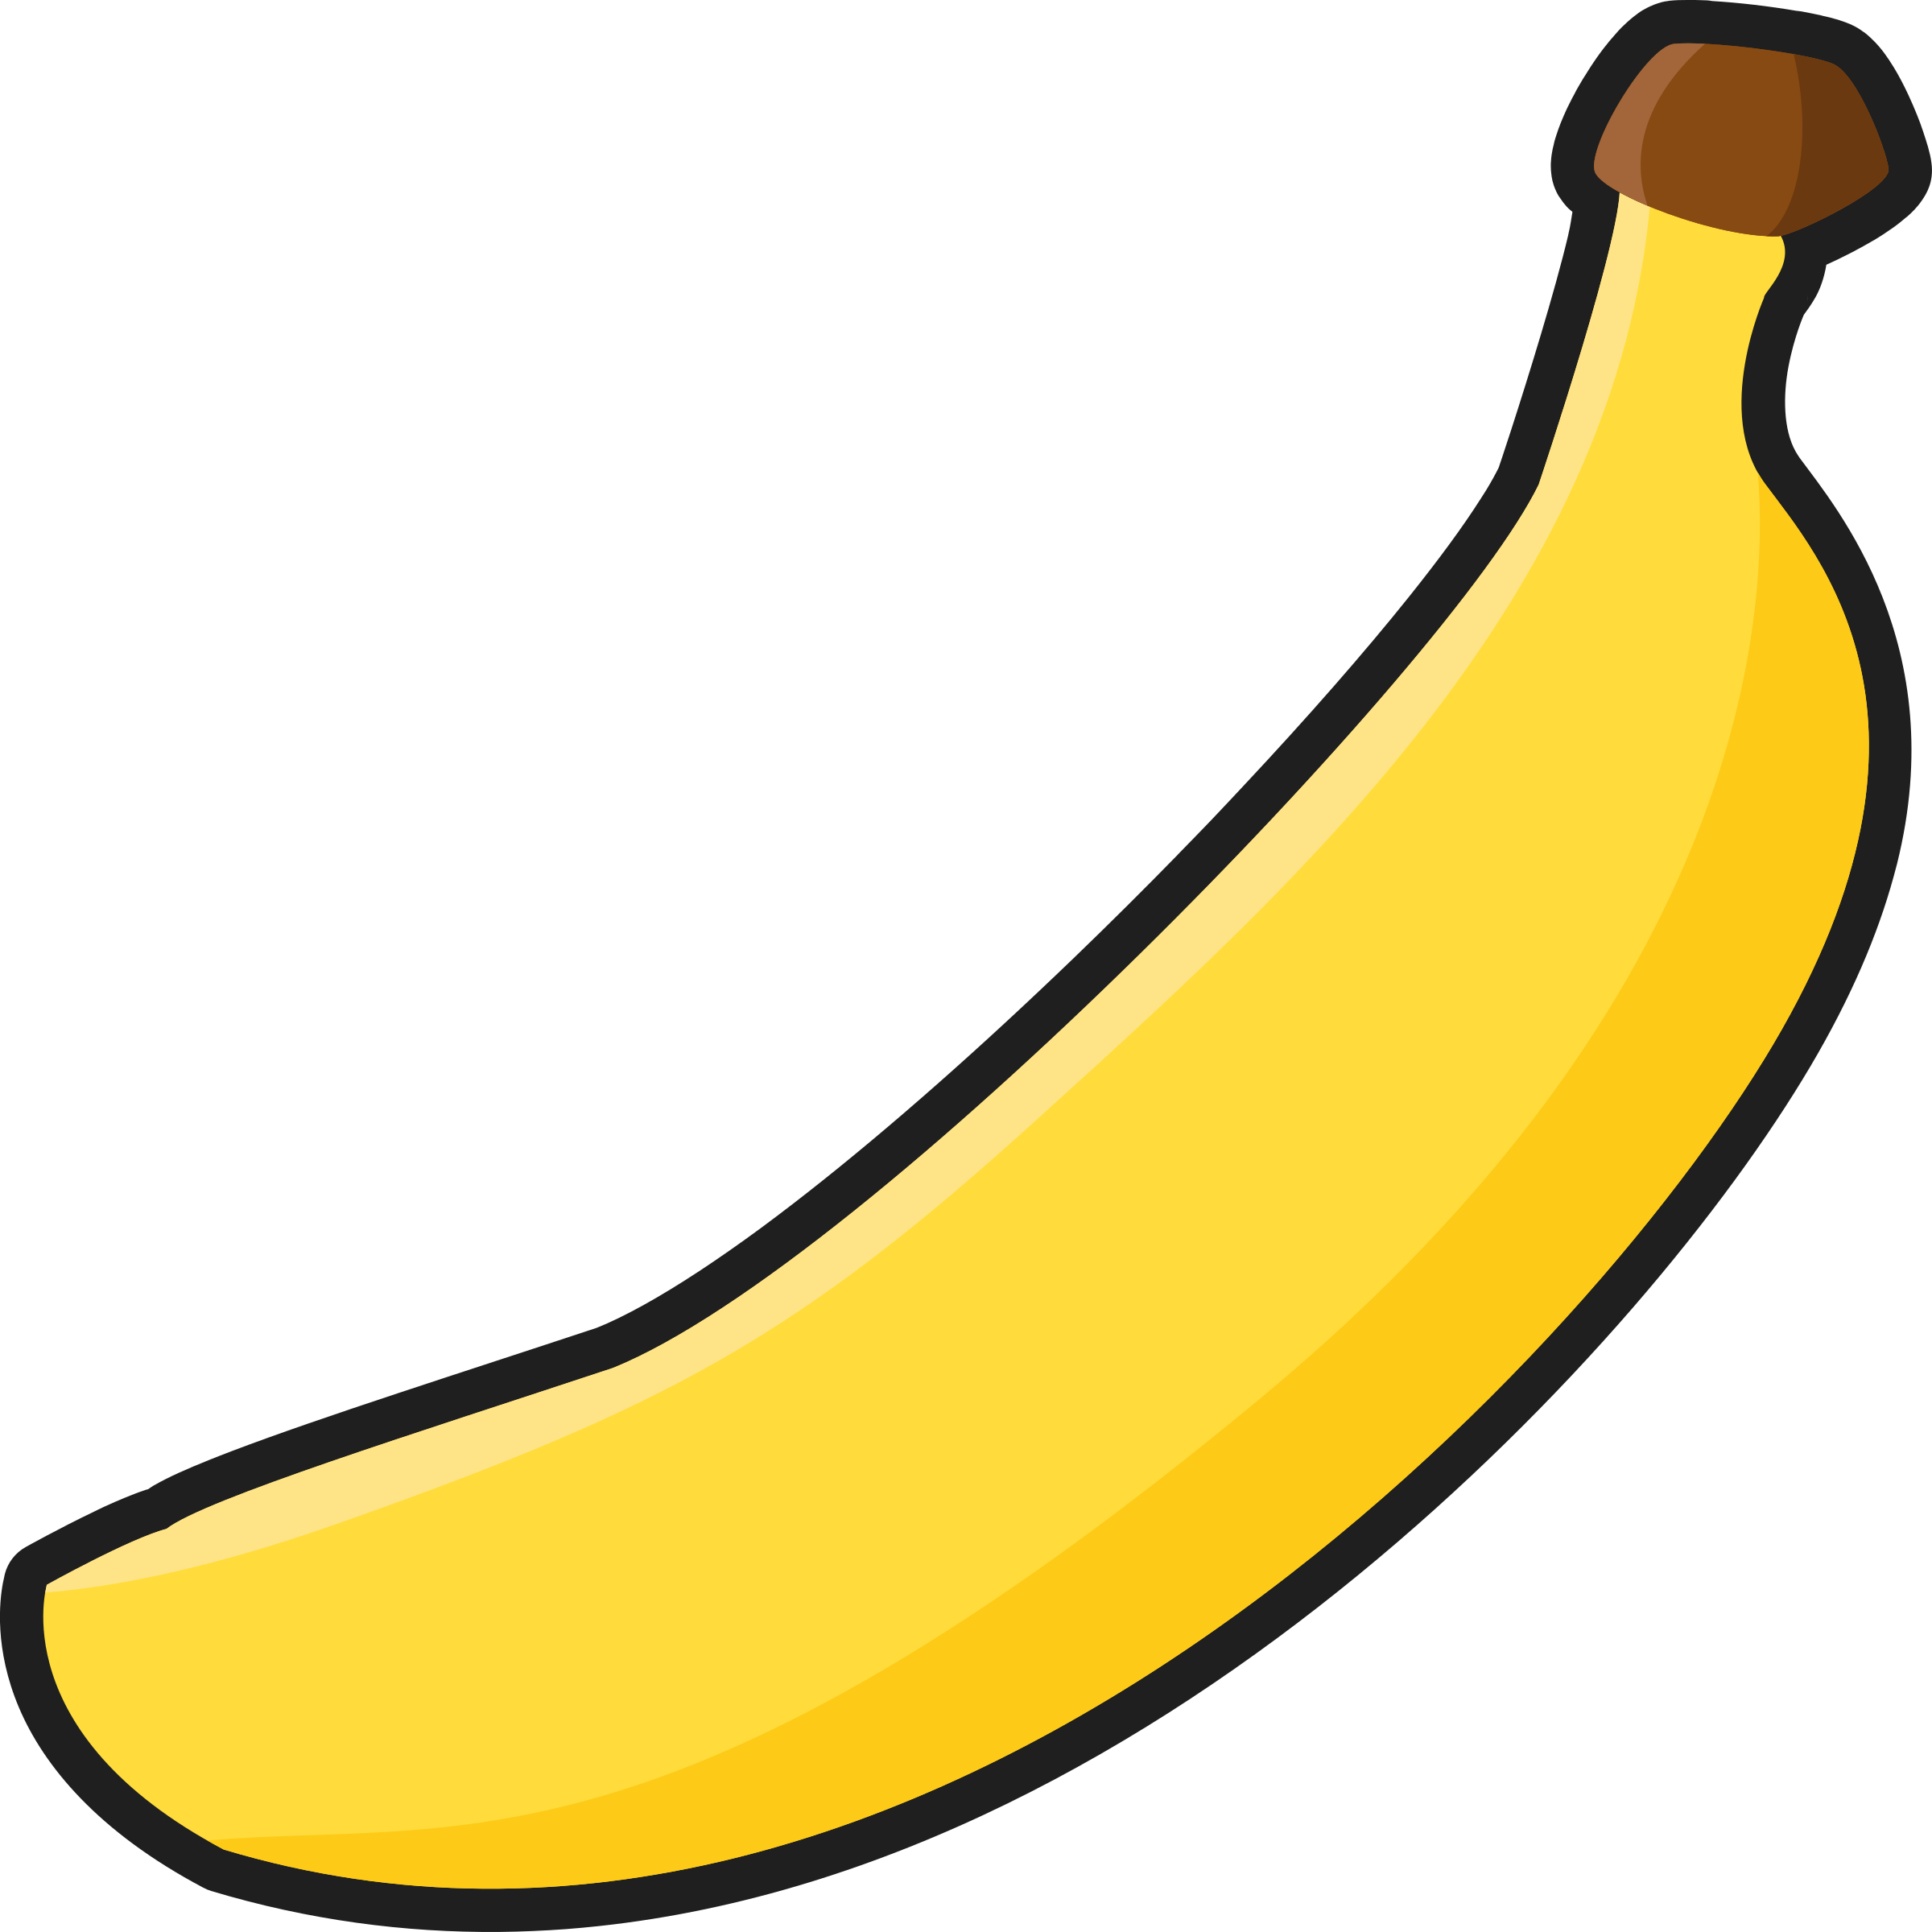 Banana Clipart Images Black And White Clip Art Clipartbarn - Banana Clipart Png (2400x2400)